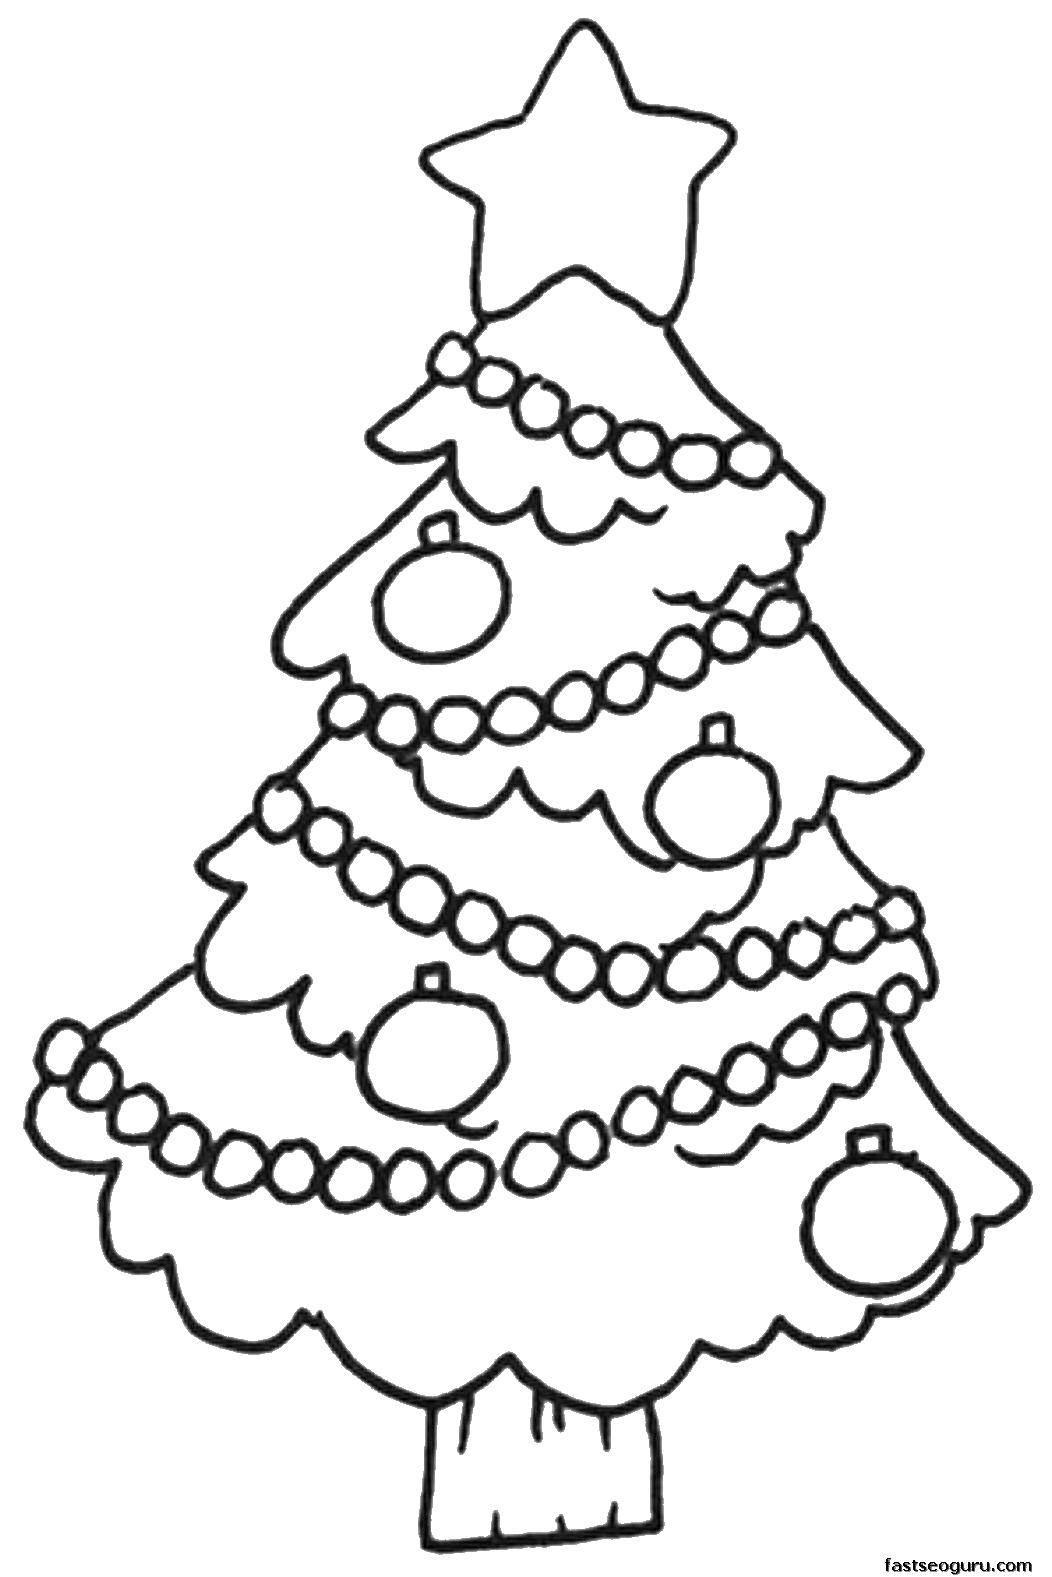 Coloring Herringbone. Category Christmas. Tags:  Christmas, Christmas toy, Christmas tree, gifts.